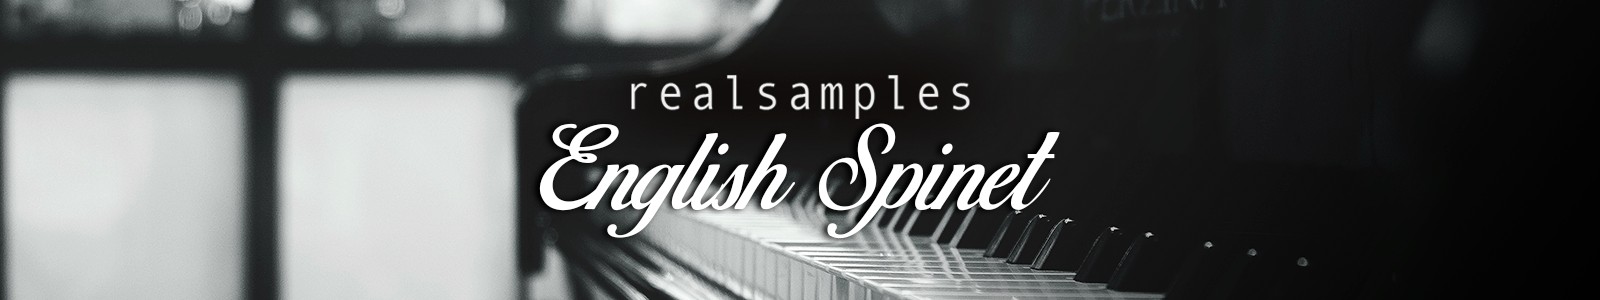 English Spinet 1718 by Realsamples